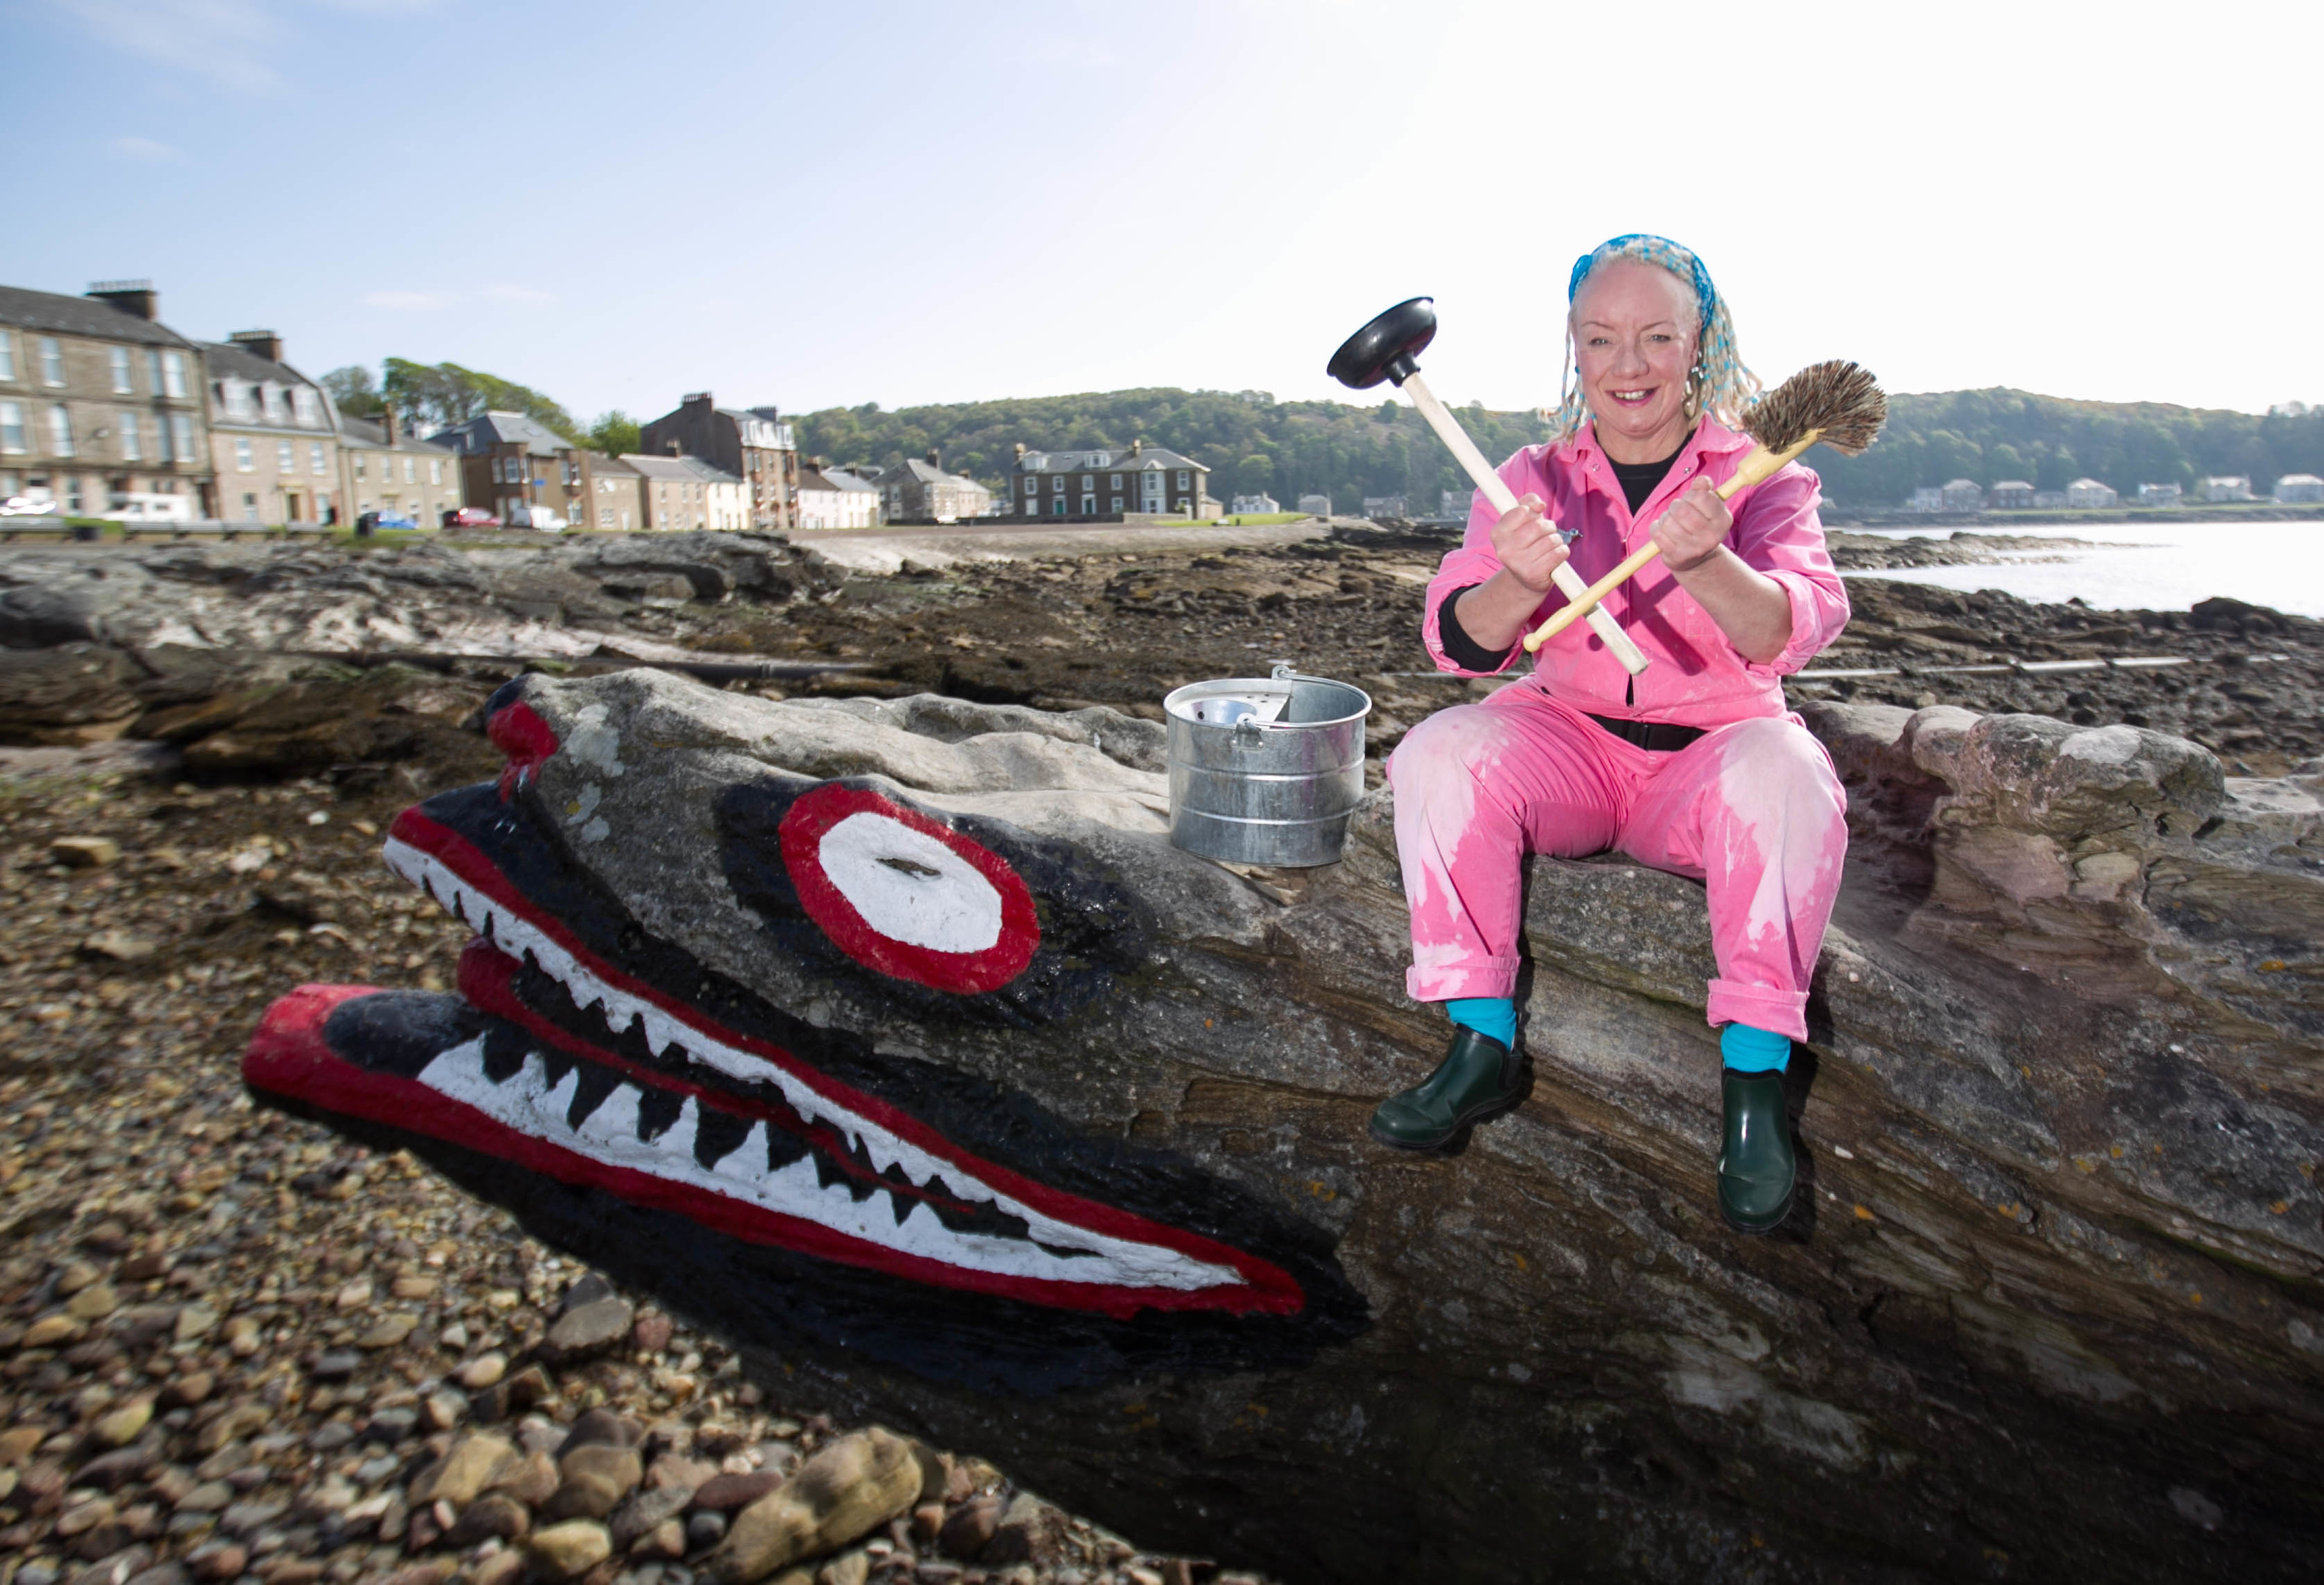 Suki McGregor took over the maintenance of the public toilets on Cumbrae when the council said they could no longer afford the upkeep (Chris Austin / DC Thomson)